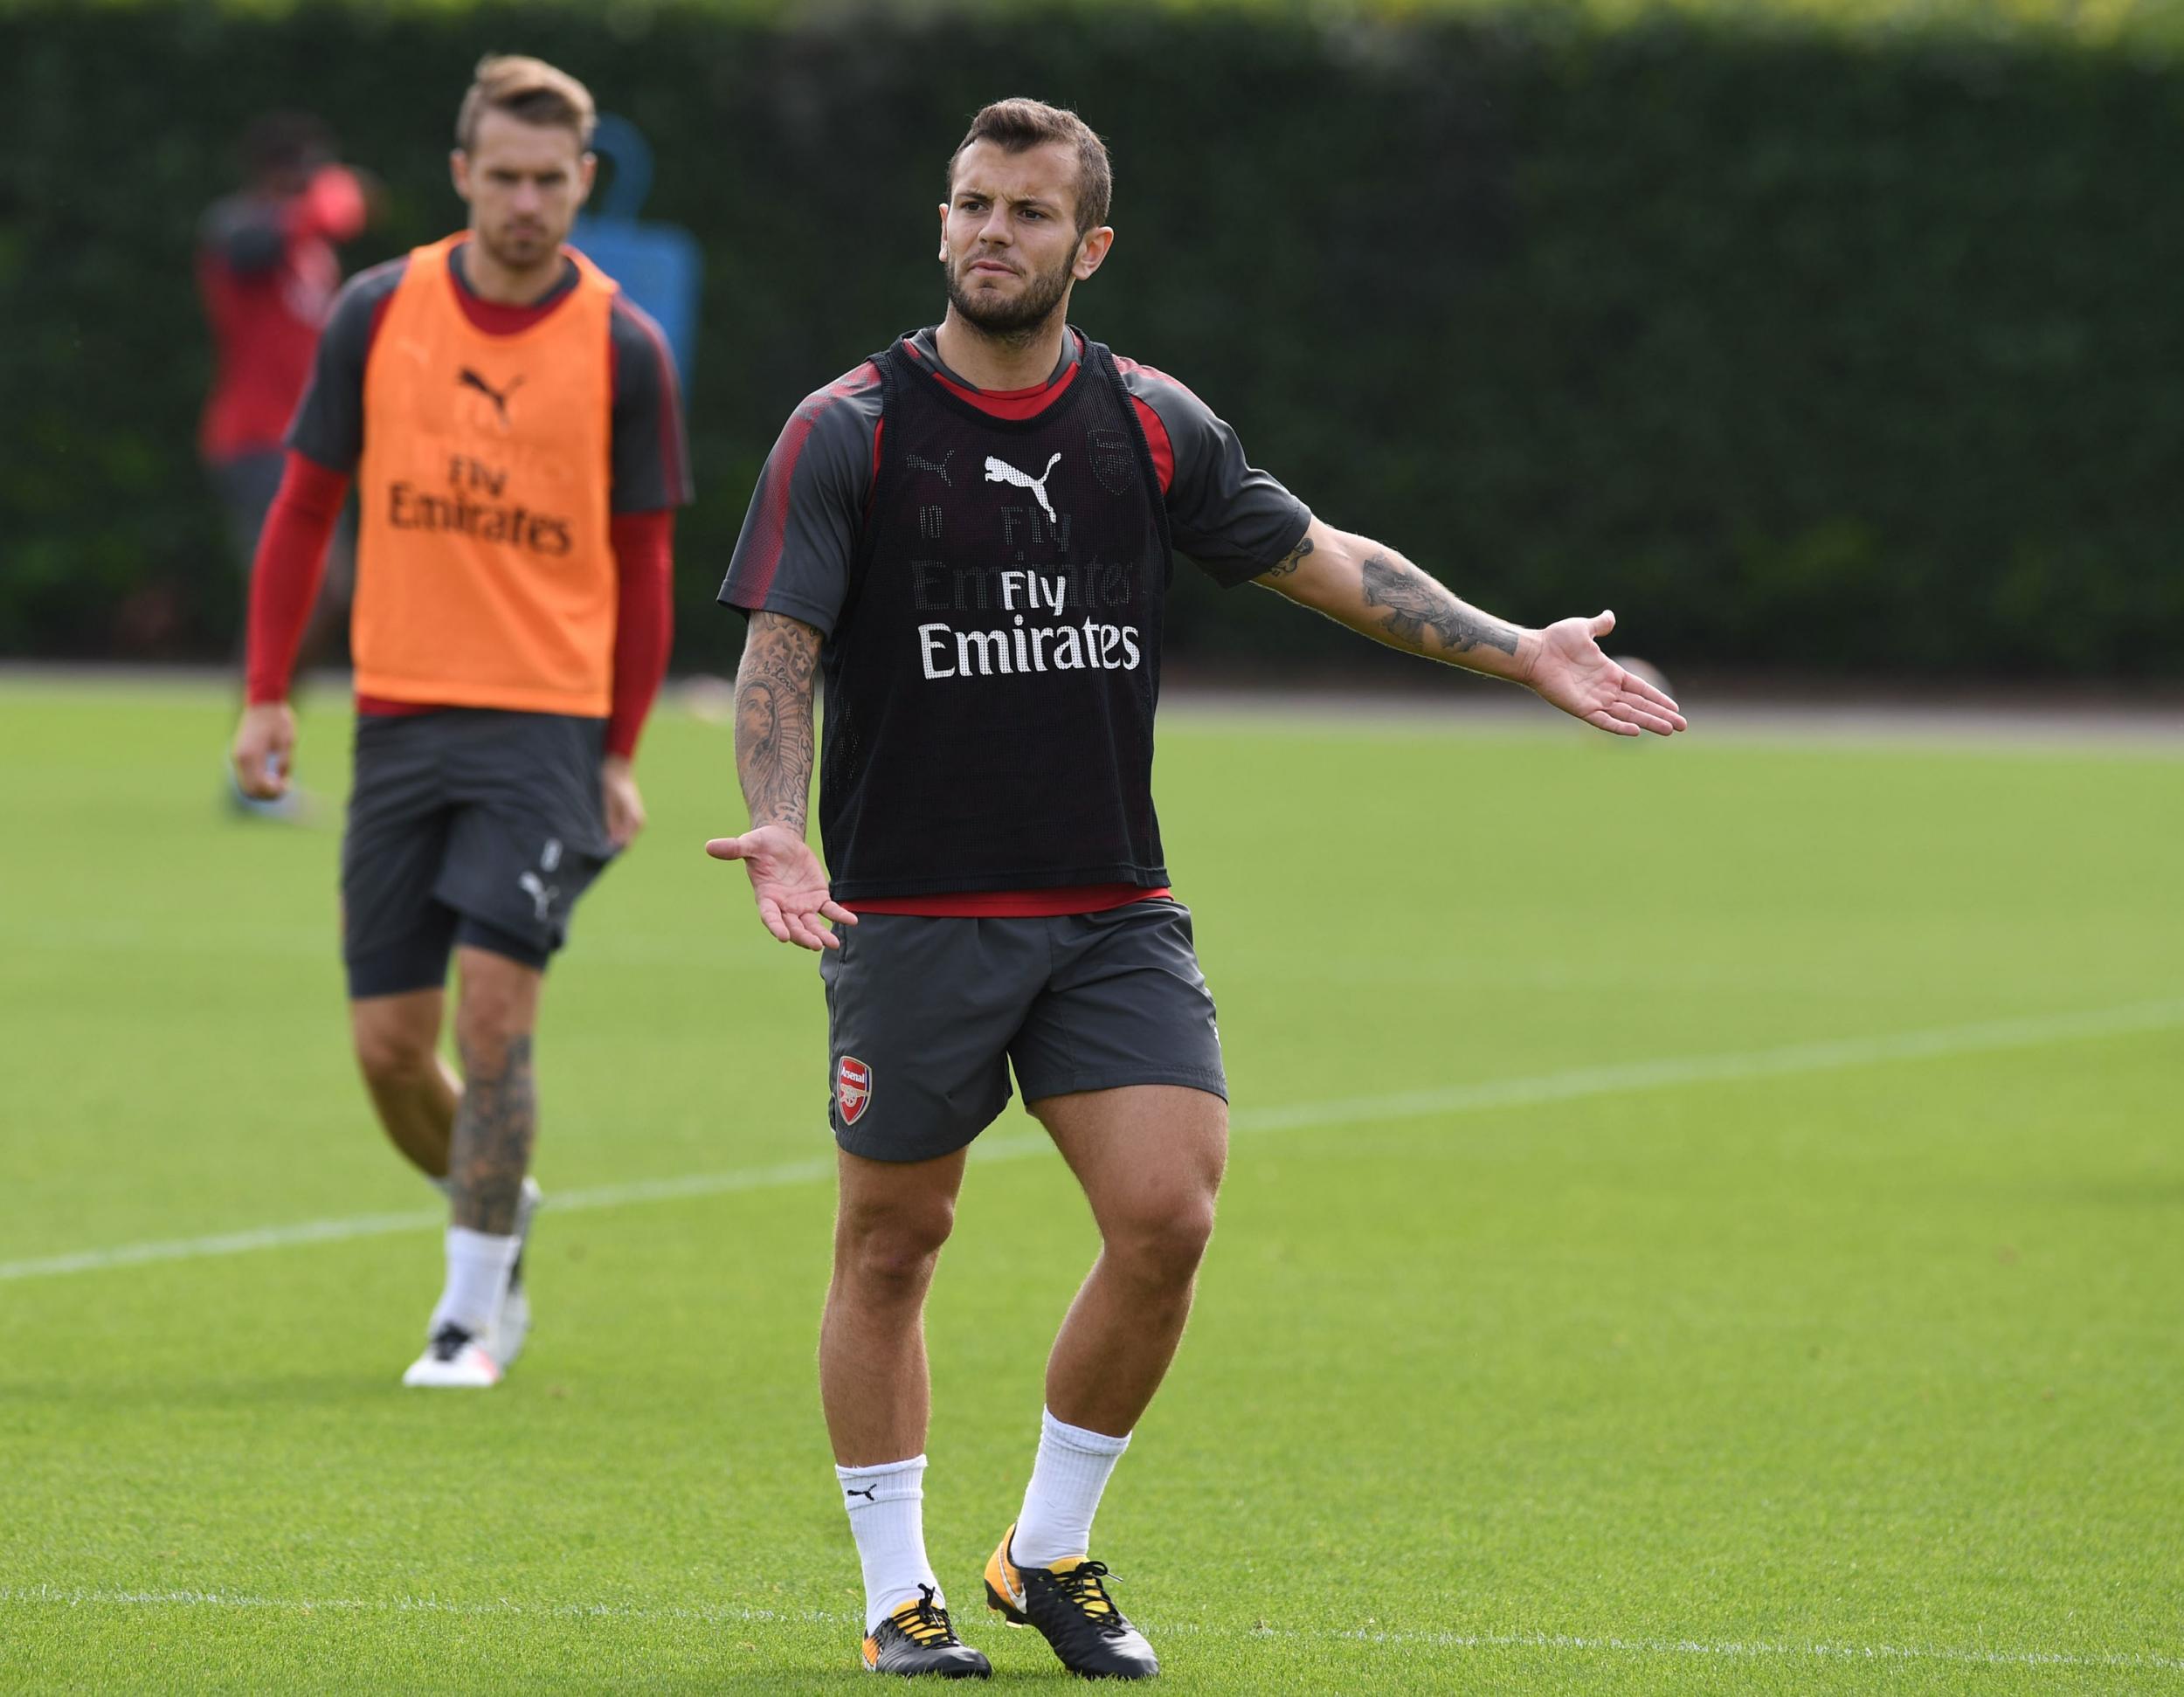 Jack Wilshere re-joined Arsenal this summer after his loan spell at Bournemouth